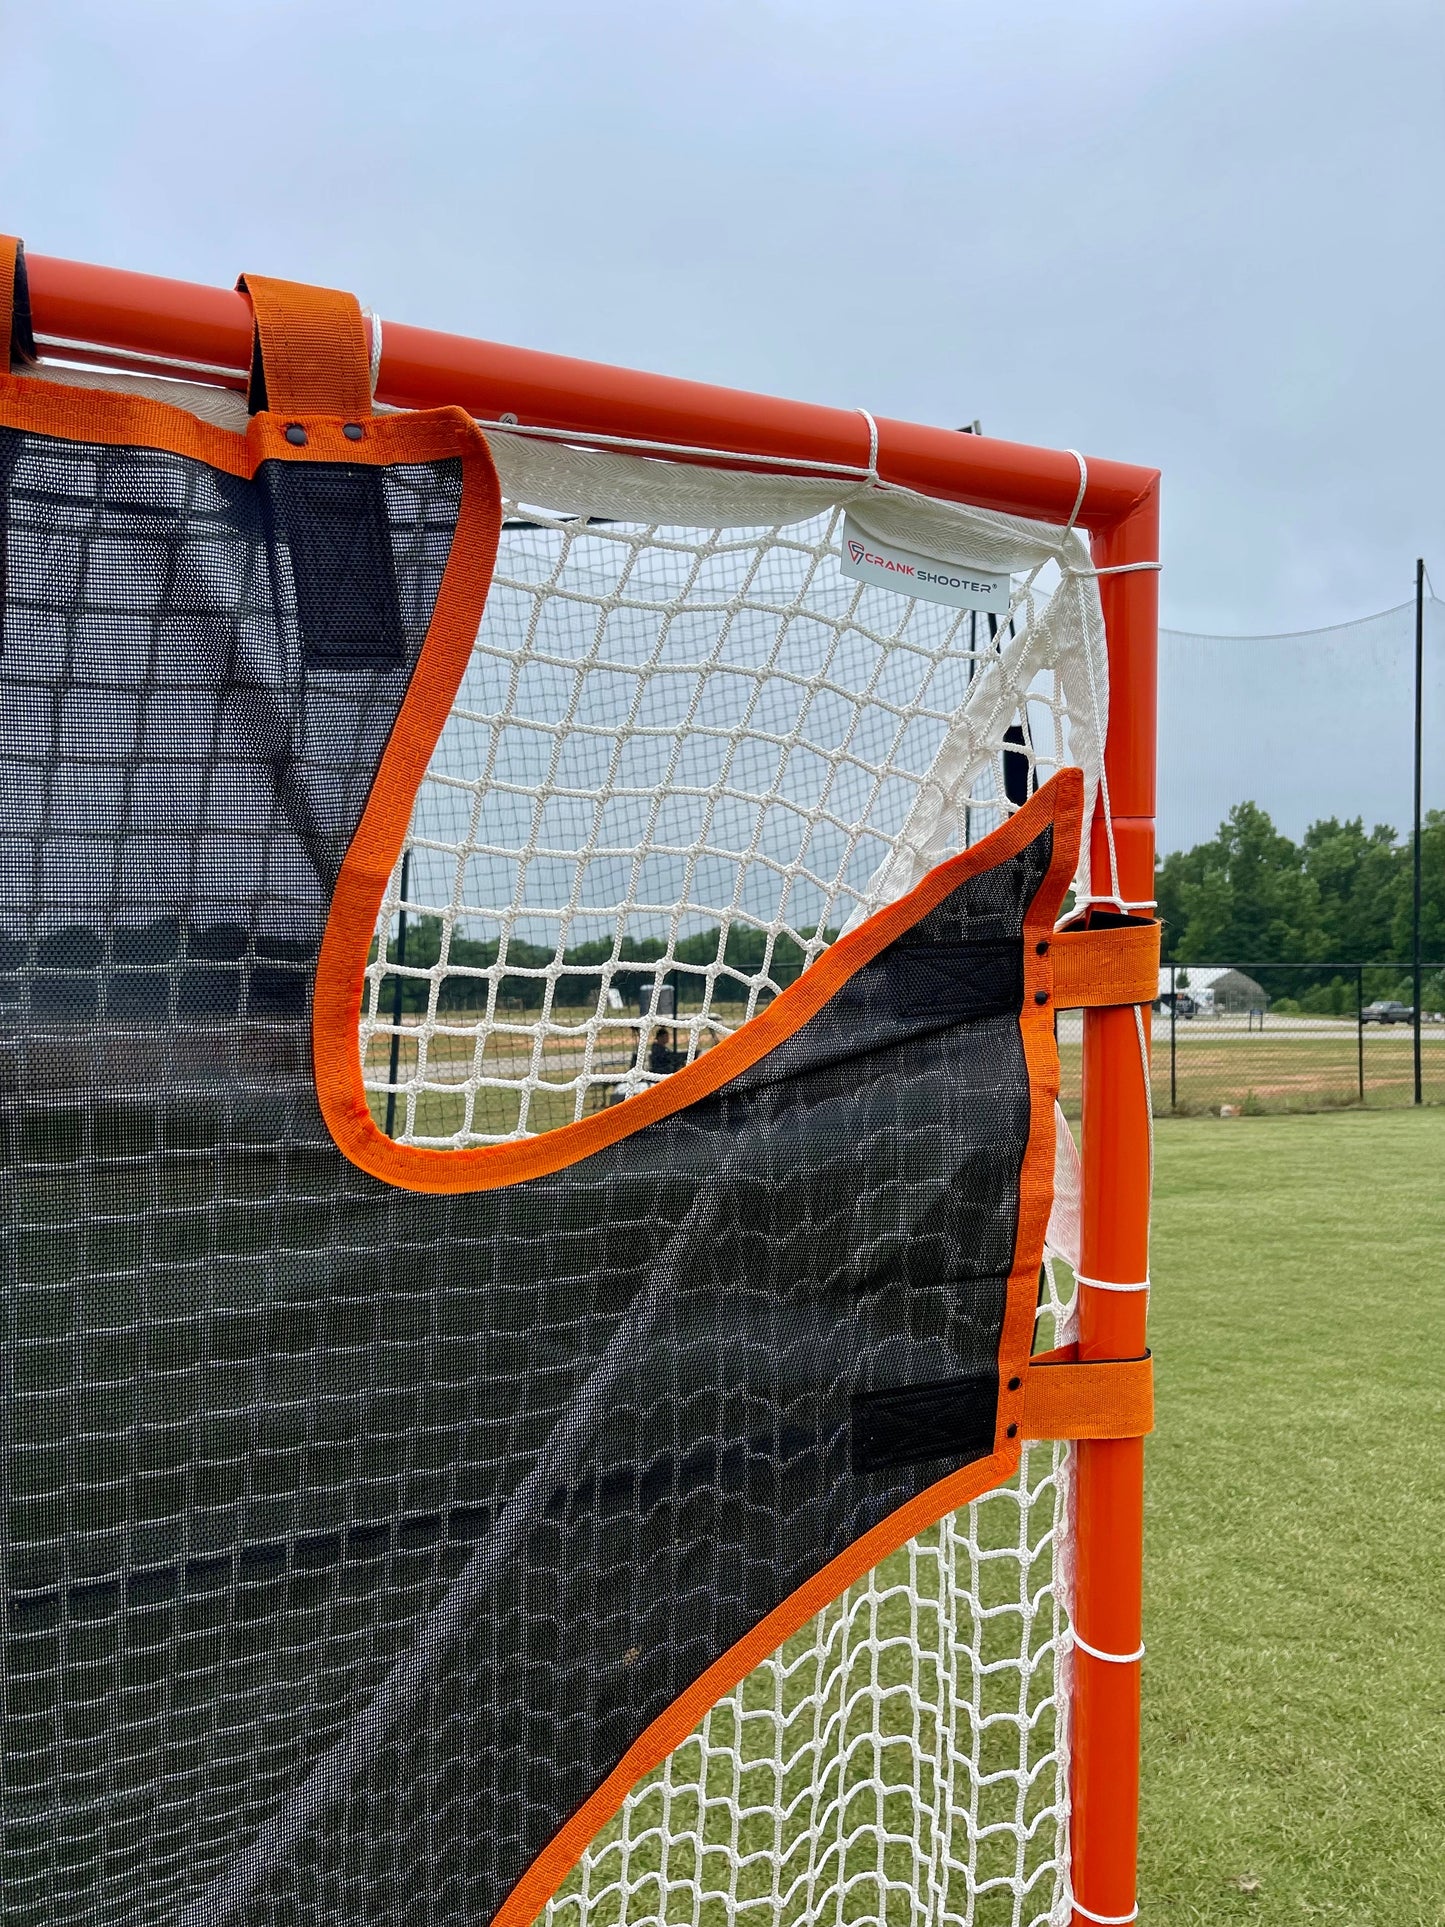 Hi-Impact Lacrosse Shot Trainer for 6'x6'x7' Goal by Crankshooter® - Triple Stitching - #1 selling shooter tutor (Hector) - FREE Shipping